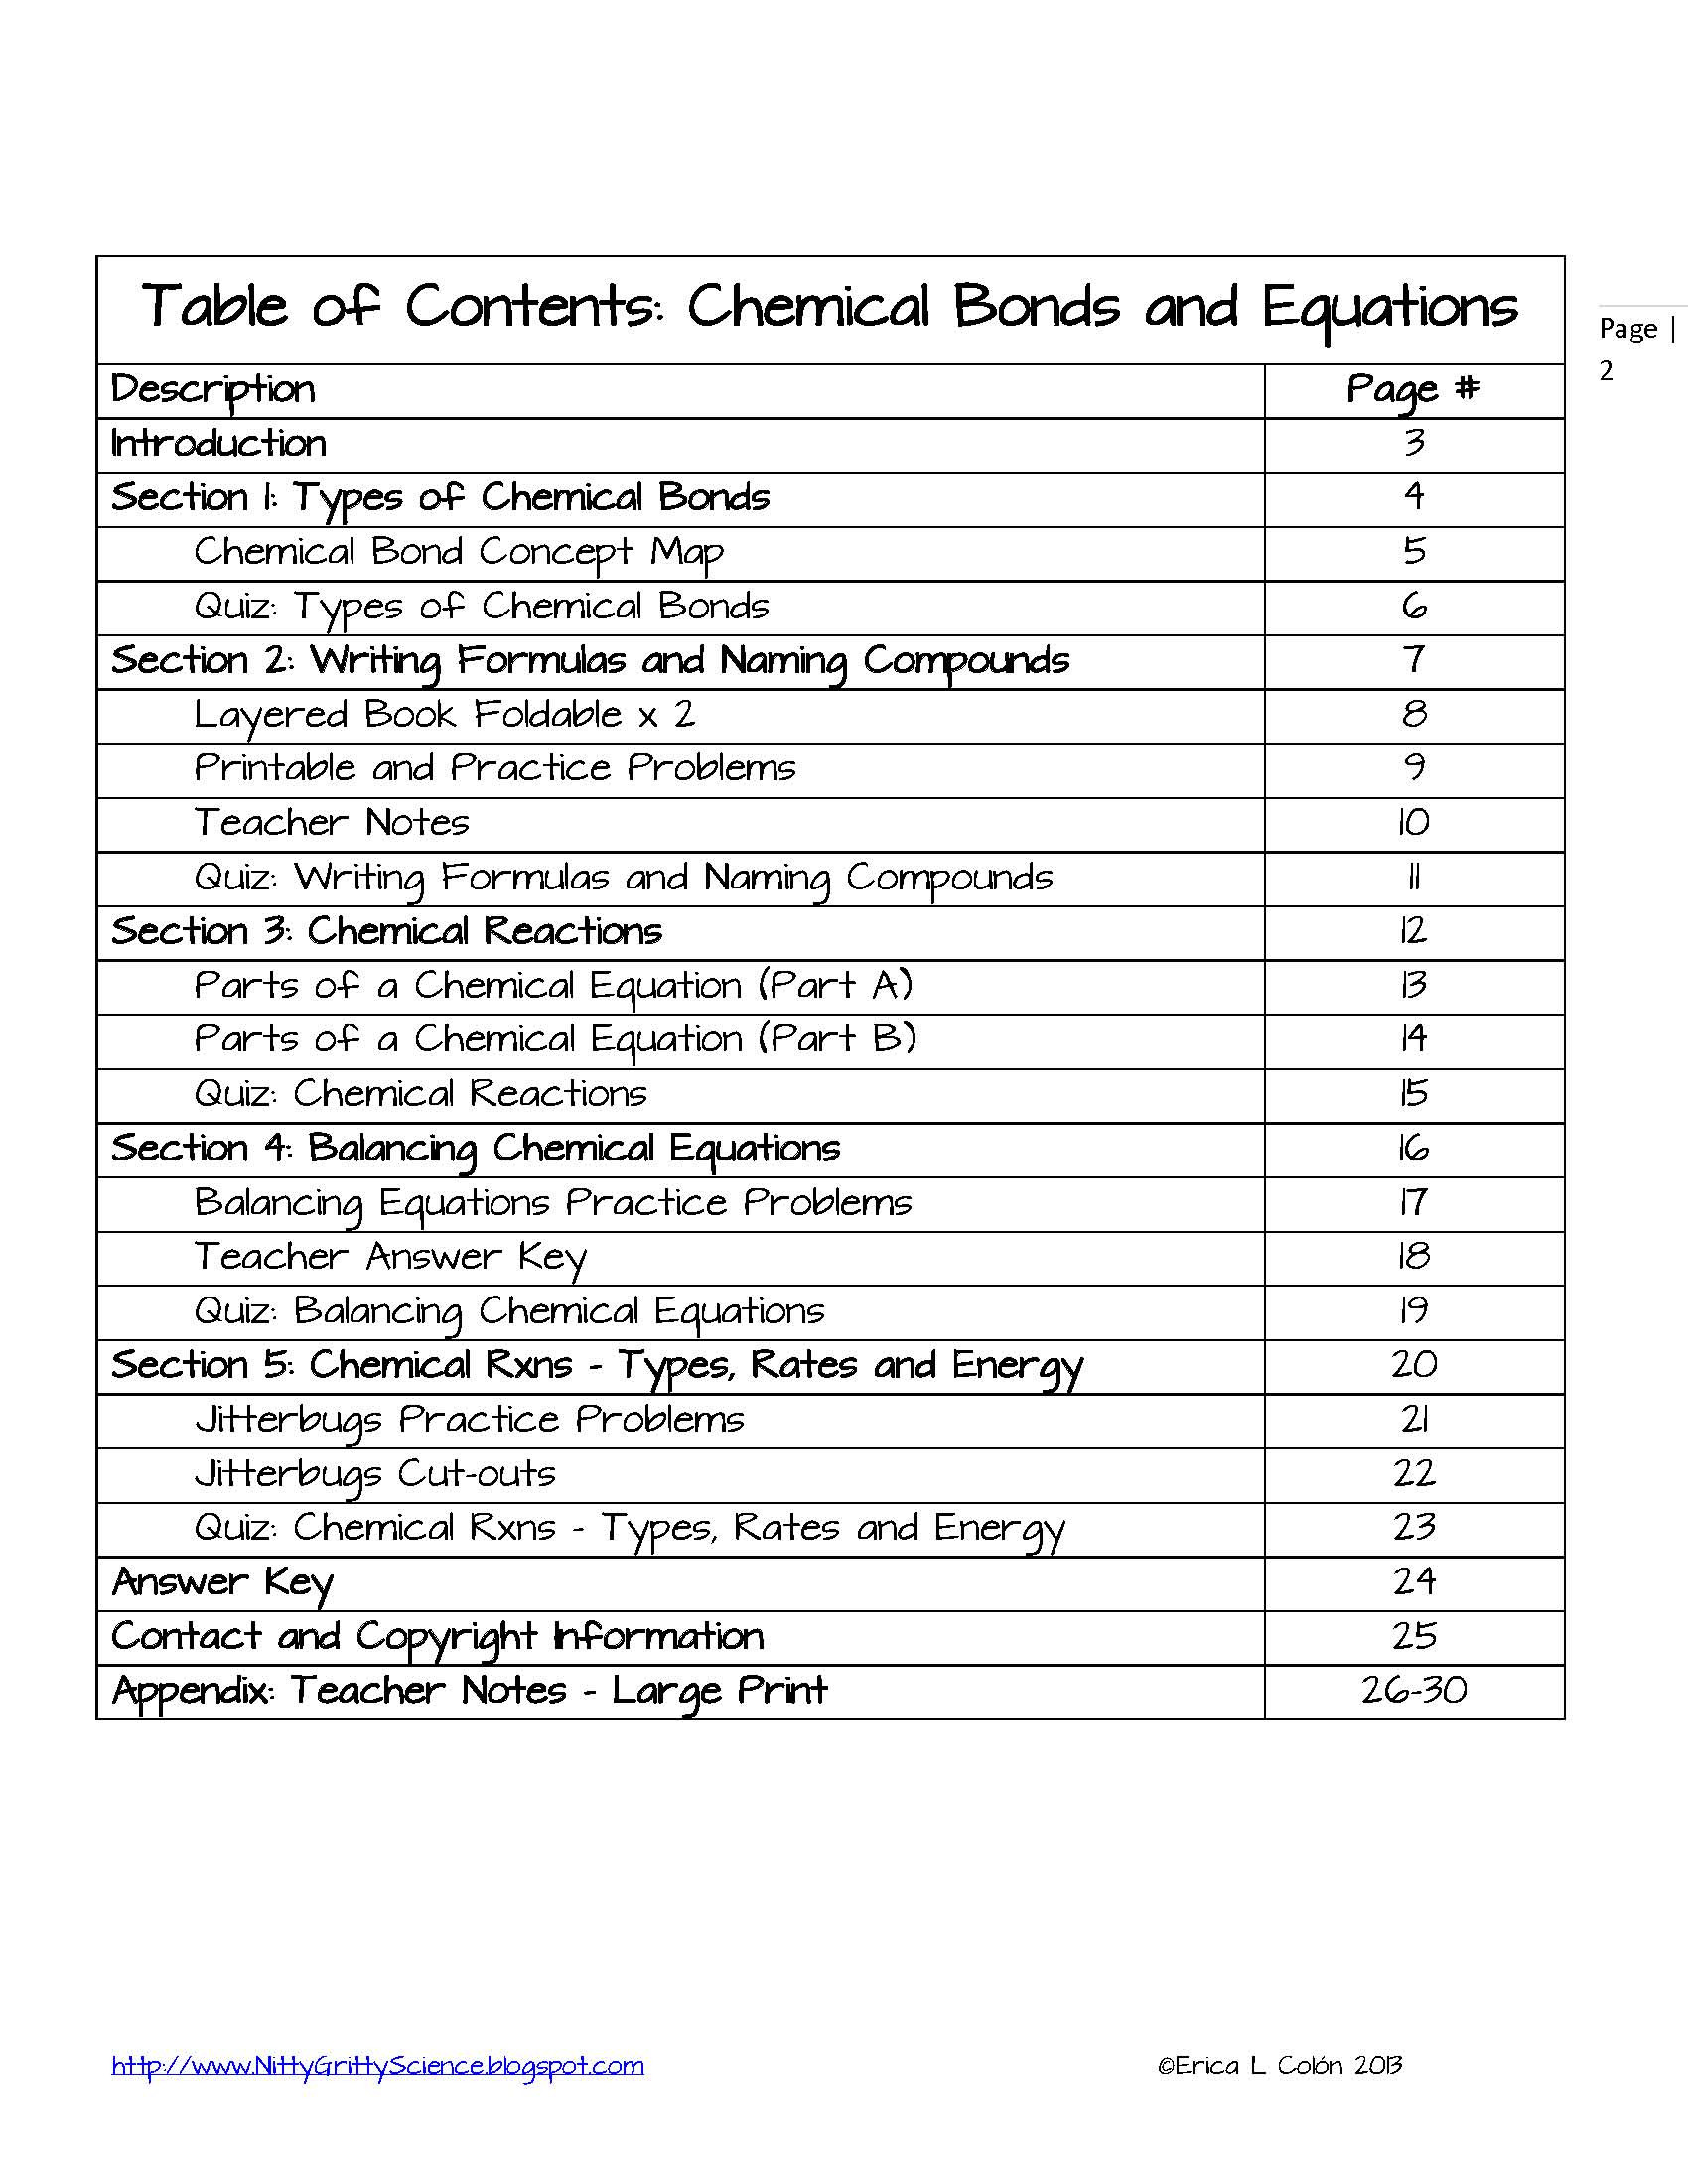 Chemical Bonds Worksheet Answers Chemical Bonds and Equations